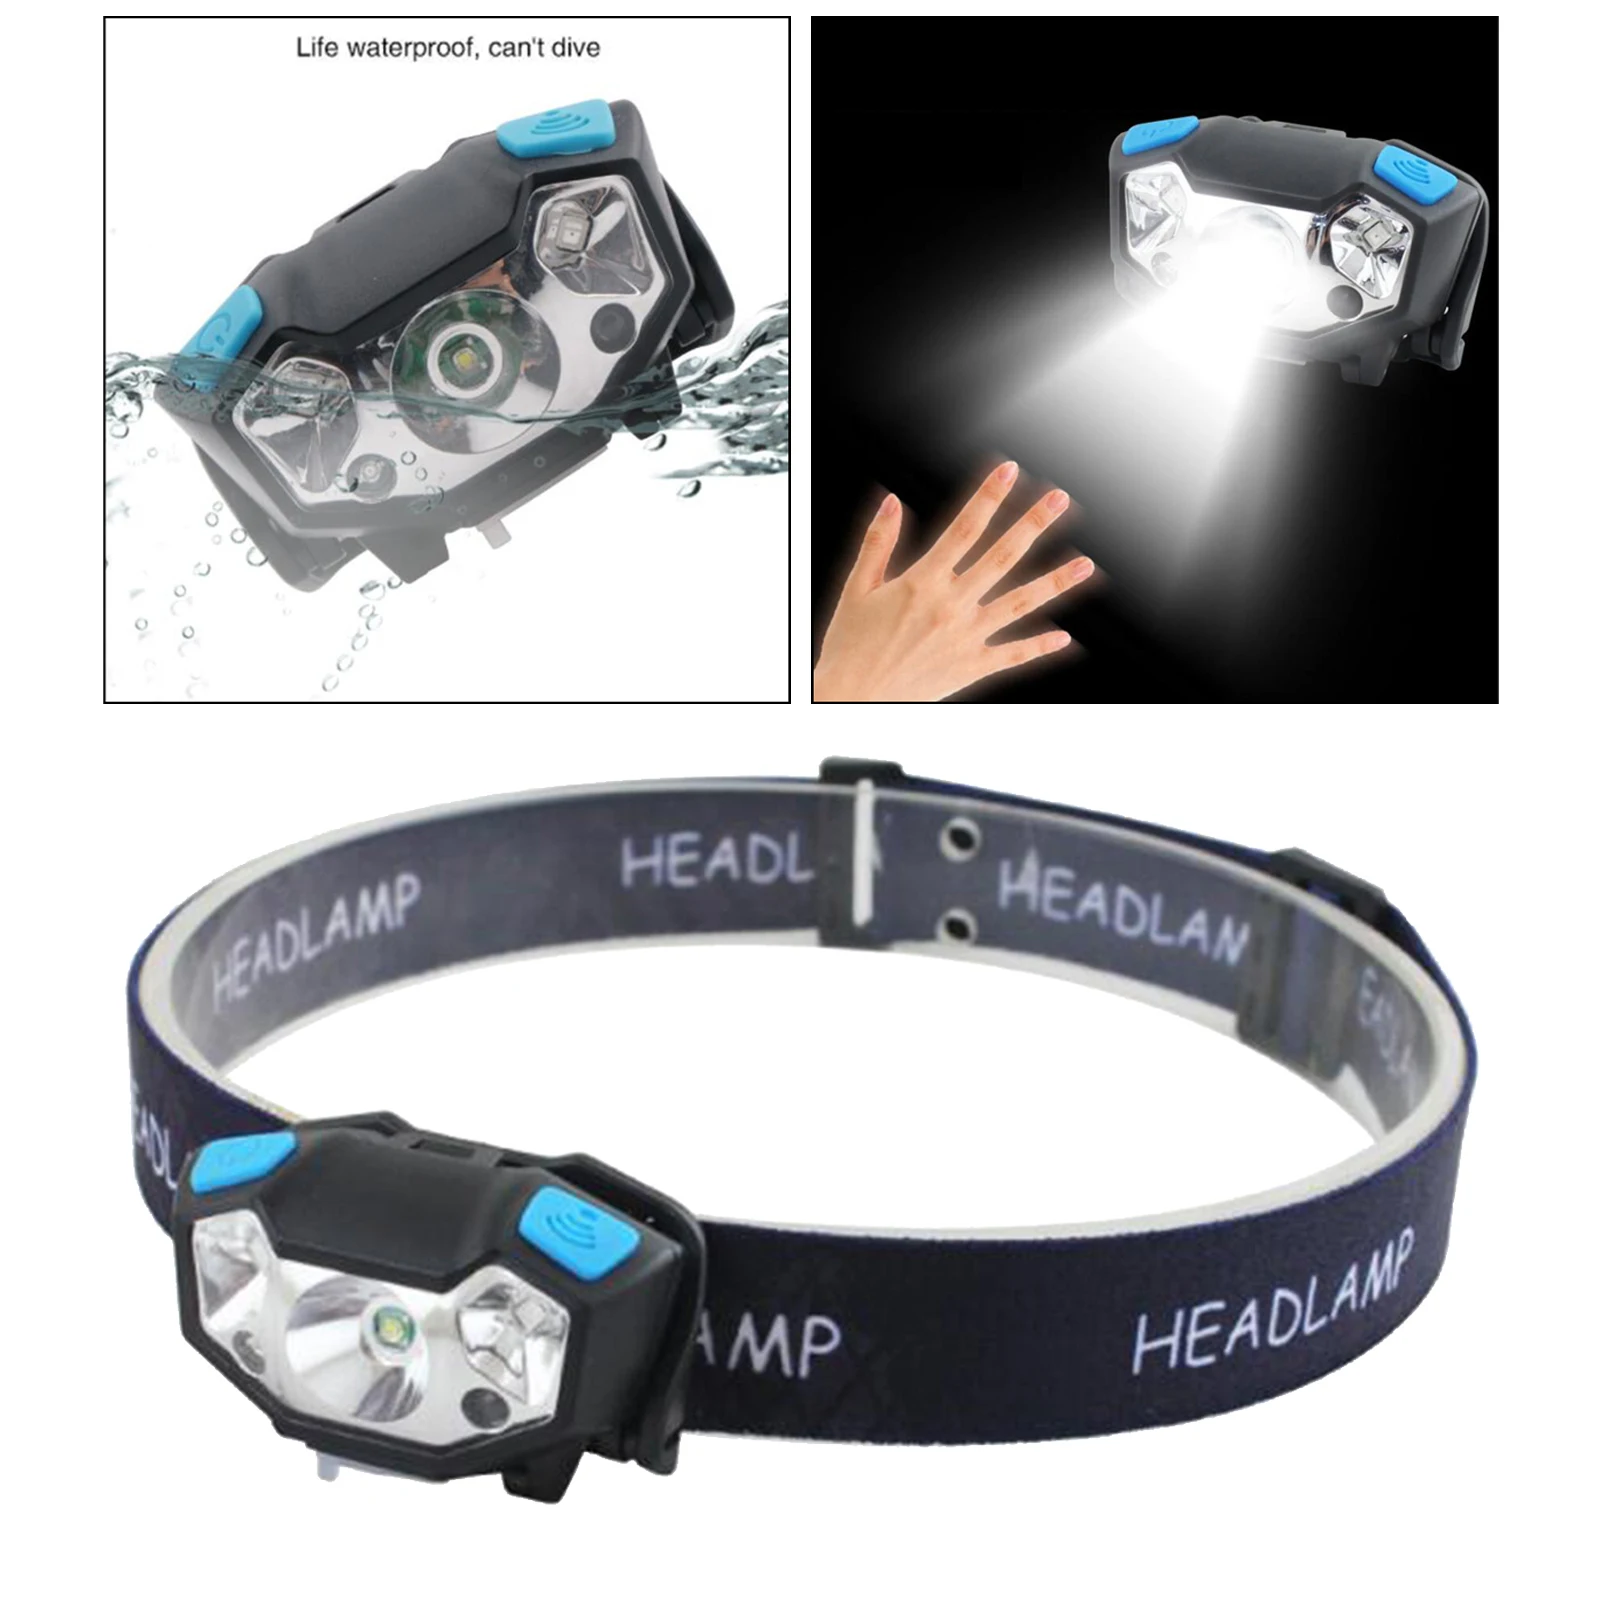 Headlight Rechargeable LED headlamp Head Light Torch Lamp Fishing Small Bright High Power Lantern Lamp for Adults Kids Outdoor